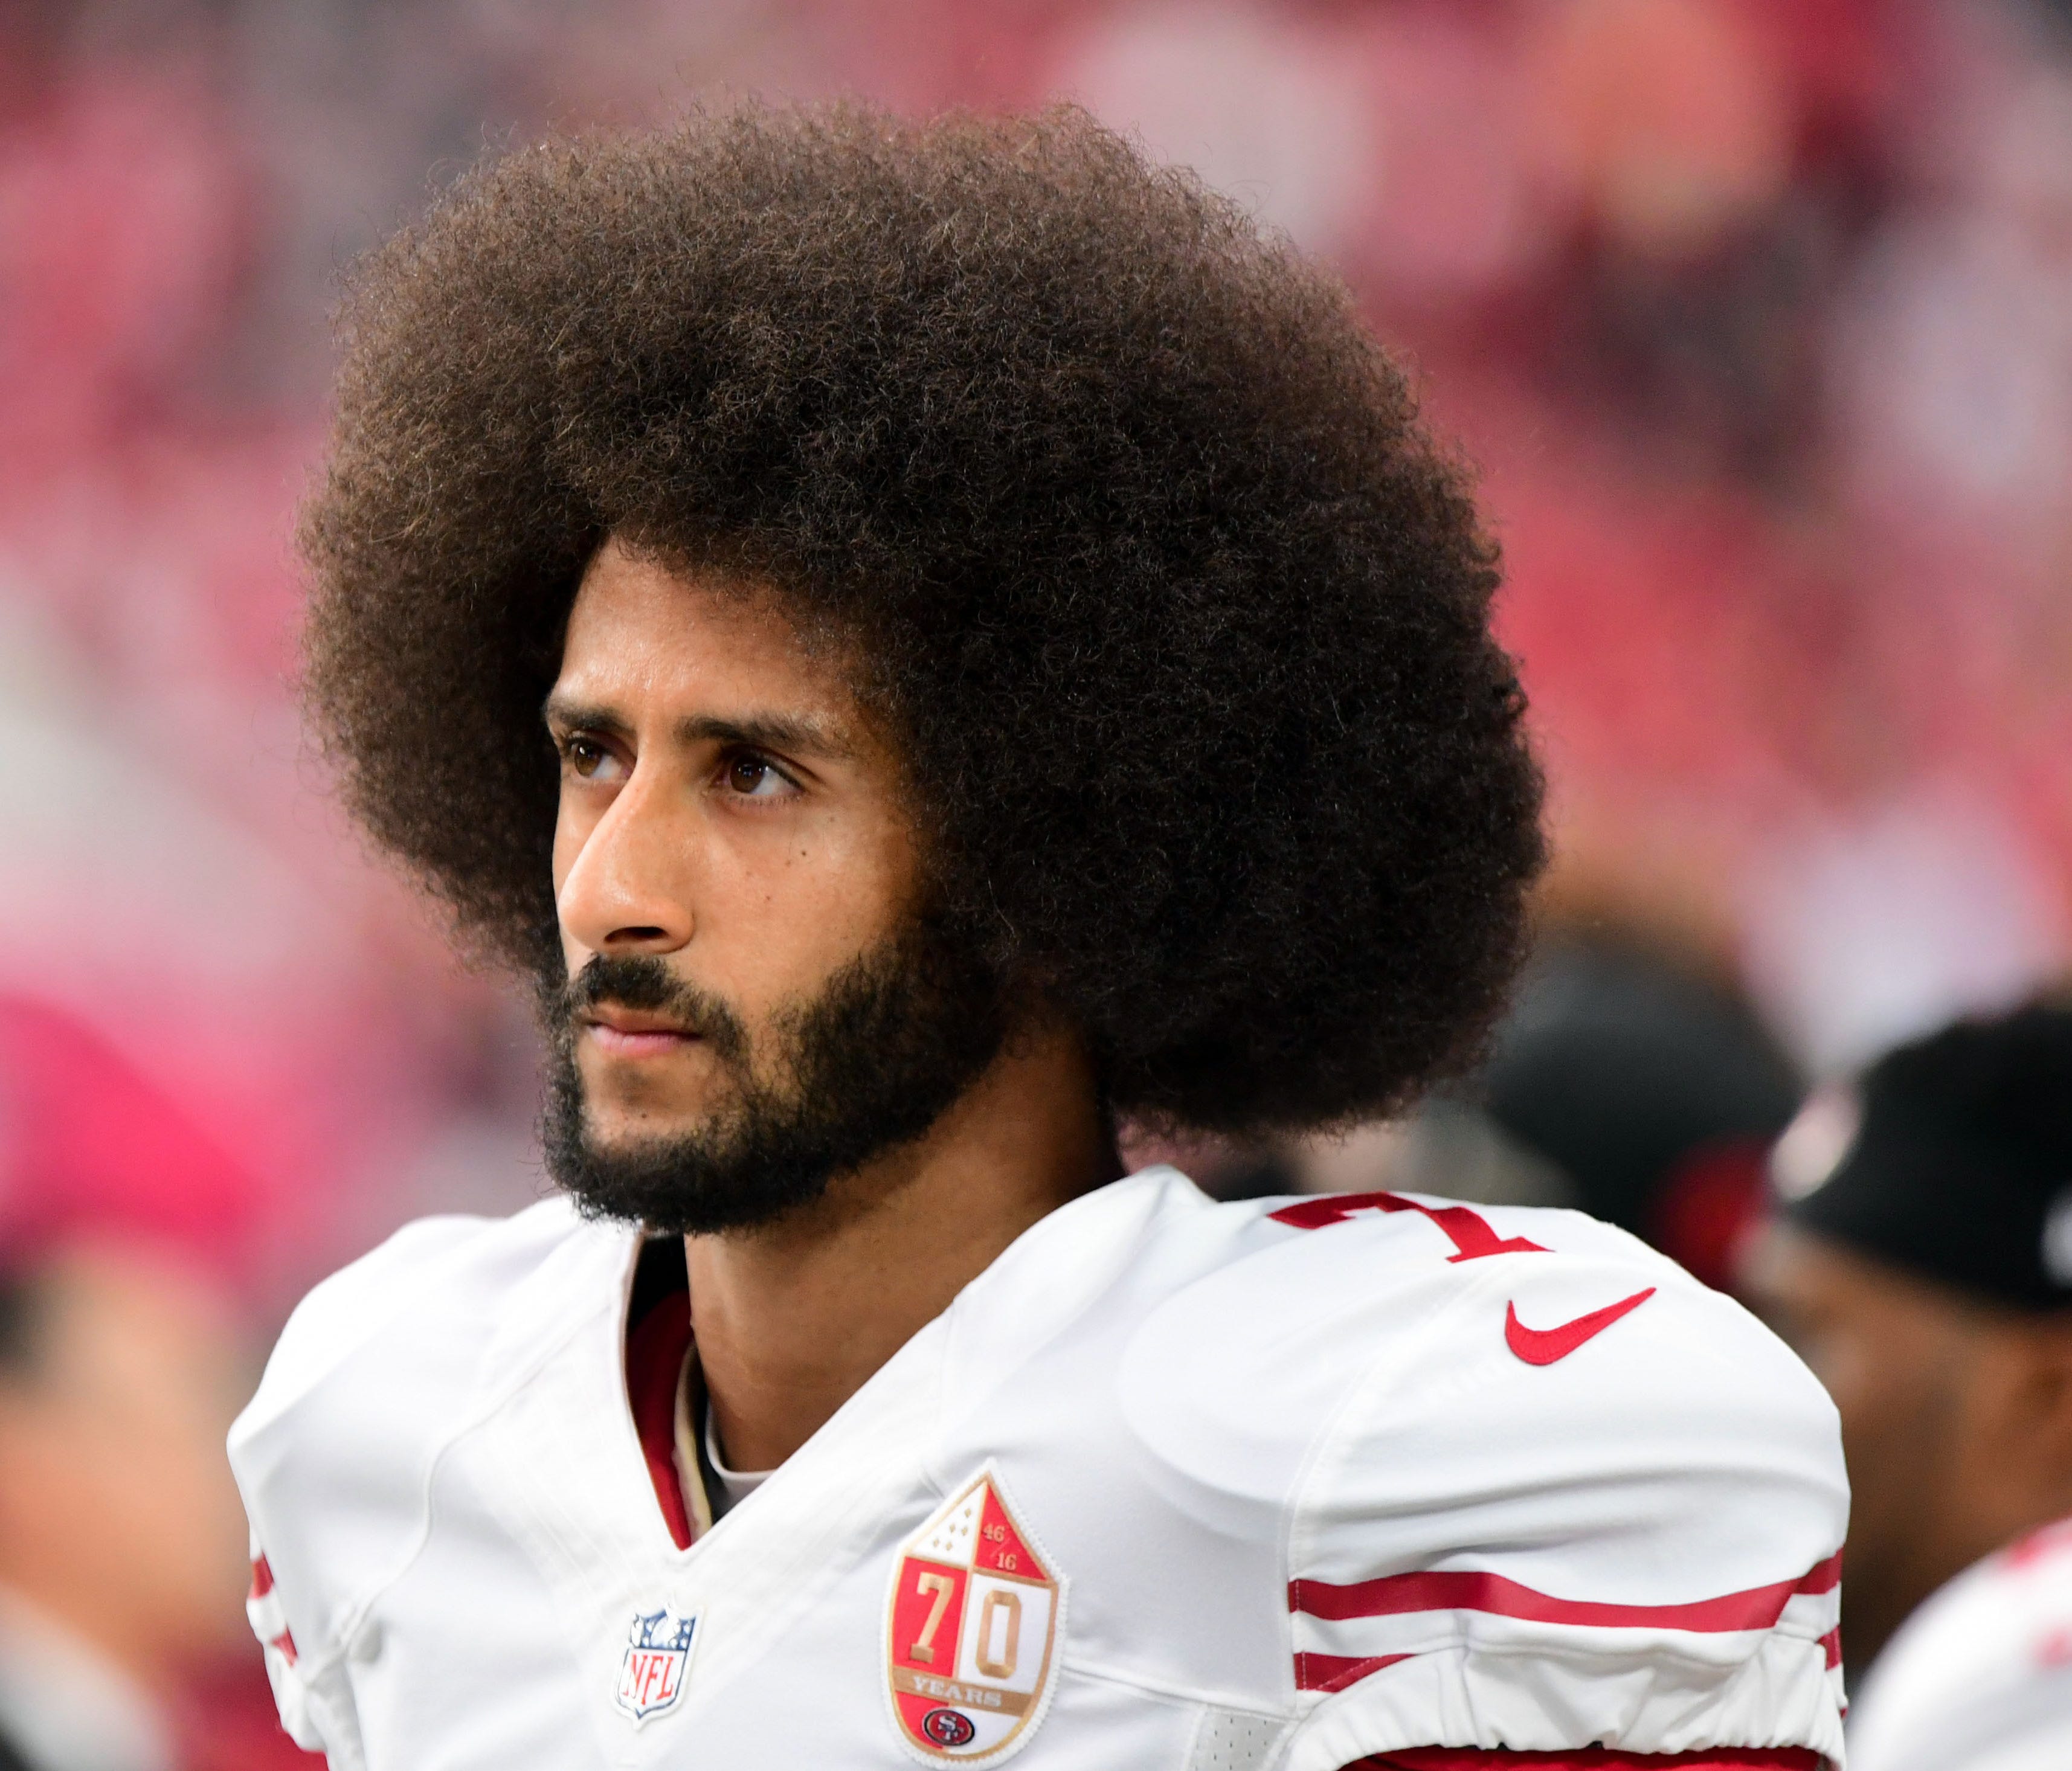 Colin Kaepernick is claiming NFL teams are colluding to keep him from playing in the league after protesting during the anthem.